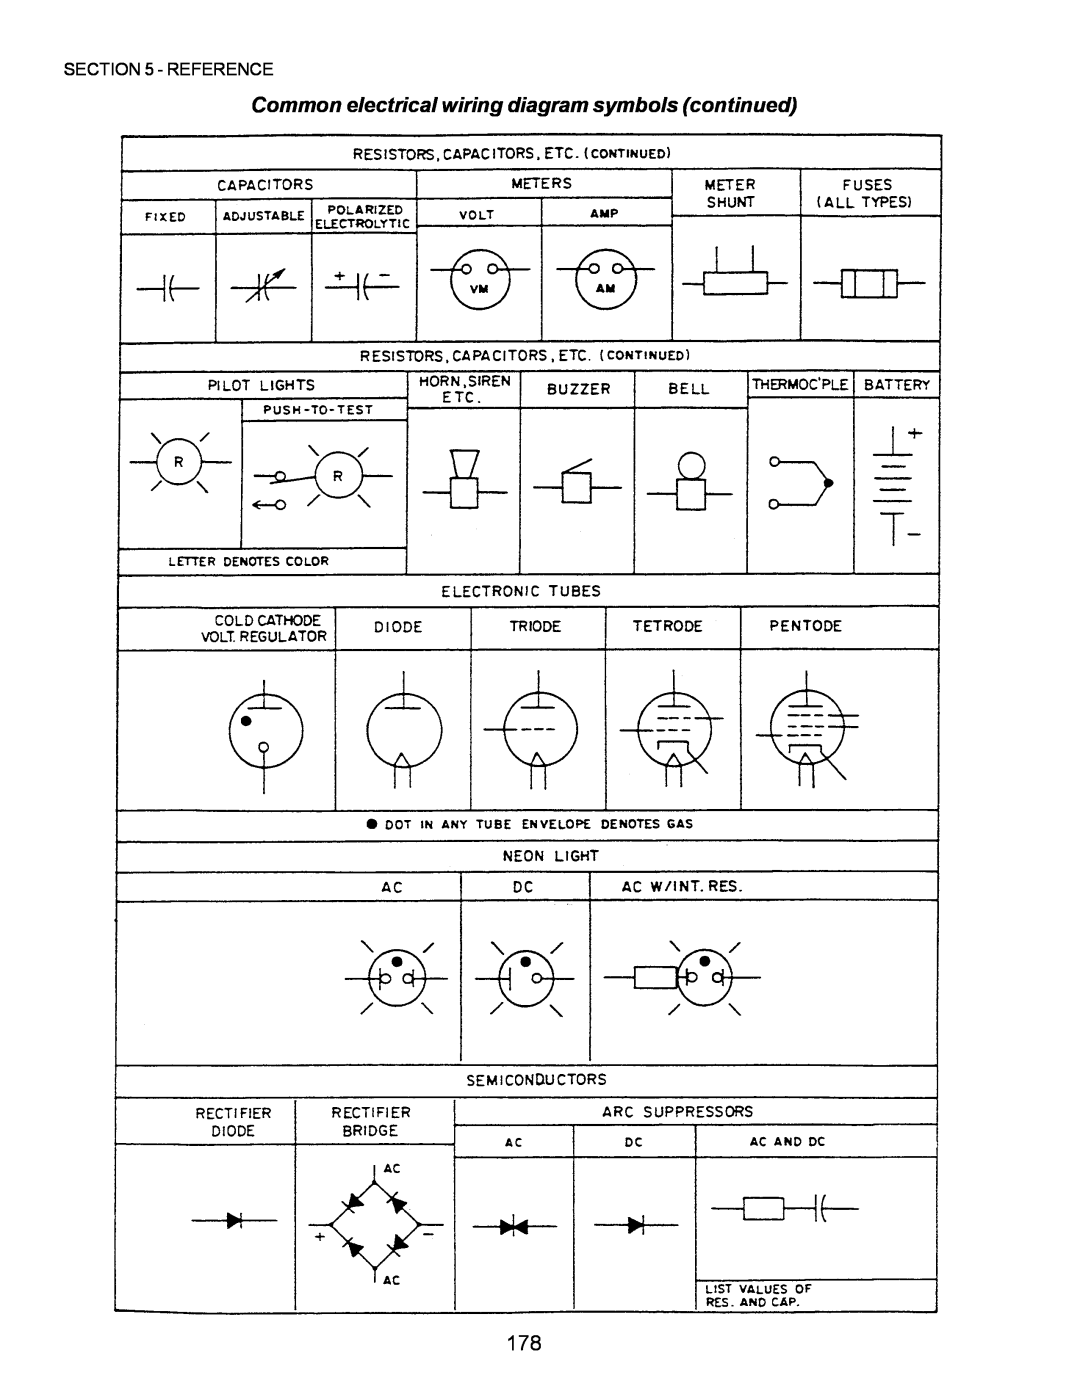 Middleby Marshall PS224 PS310, PS570, PS360, PS200, PS555, PS220 Common electrical wiring diagram symbols continued, Reference 